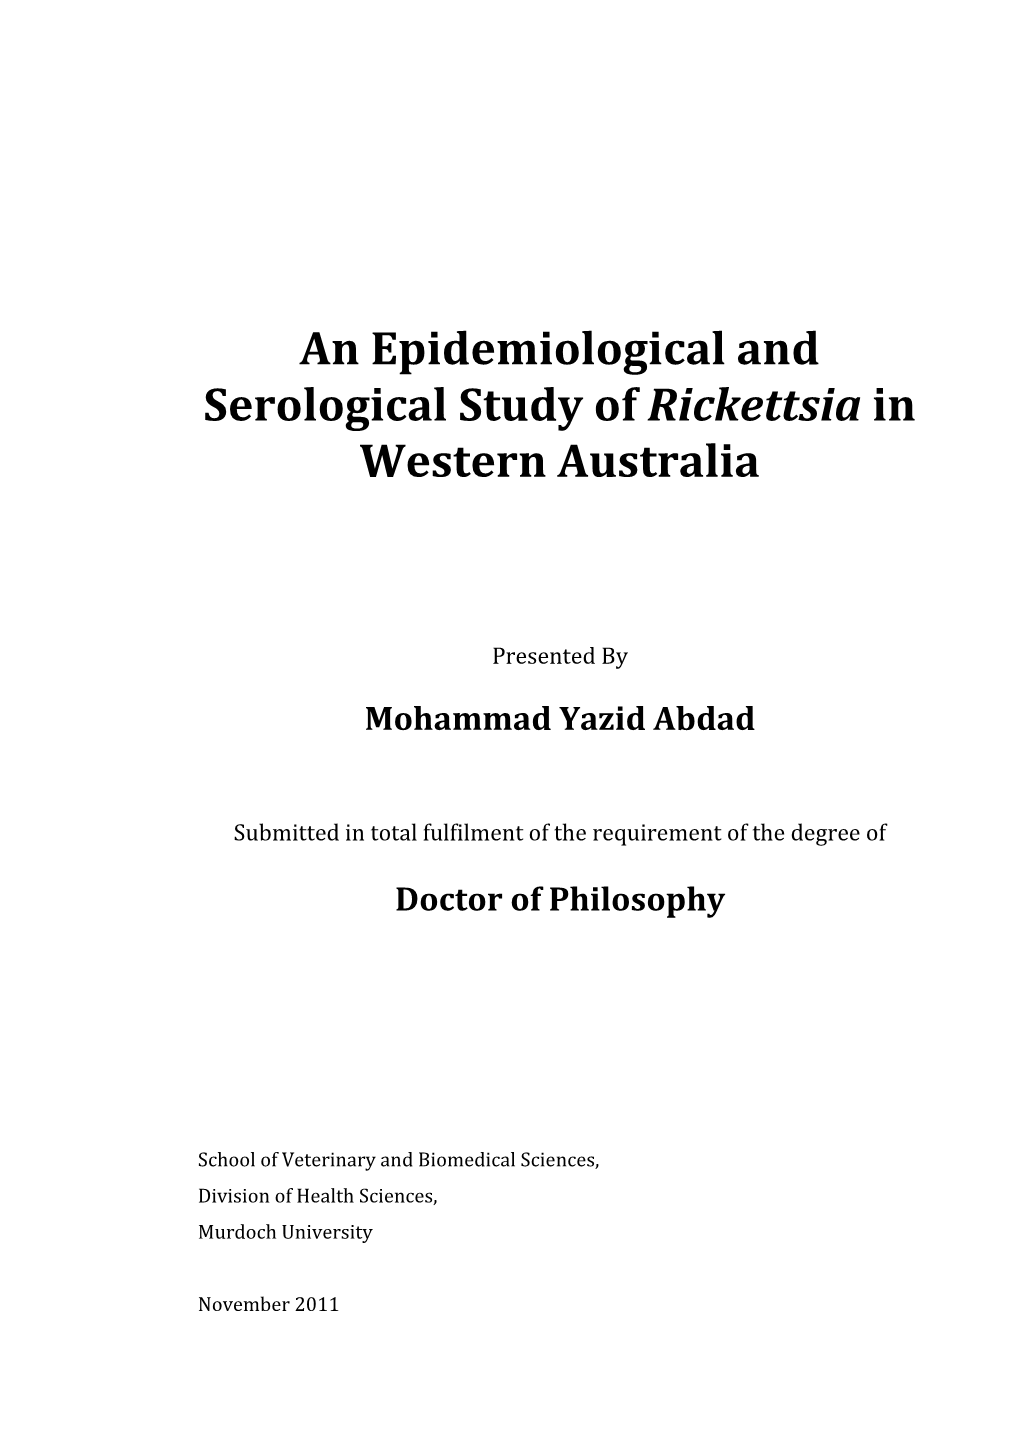 An Epidemiological and Serological Study of Rickettsia in Western Australia